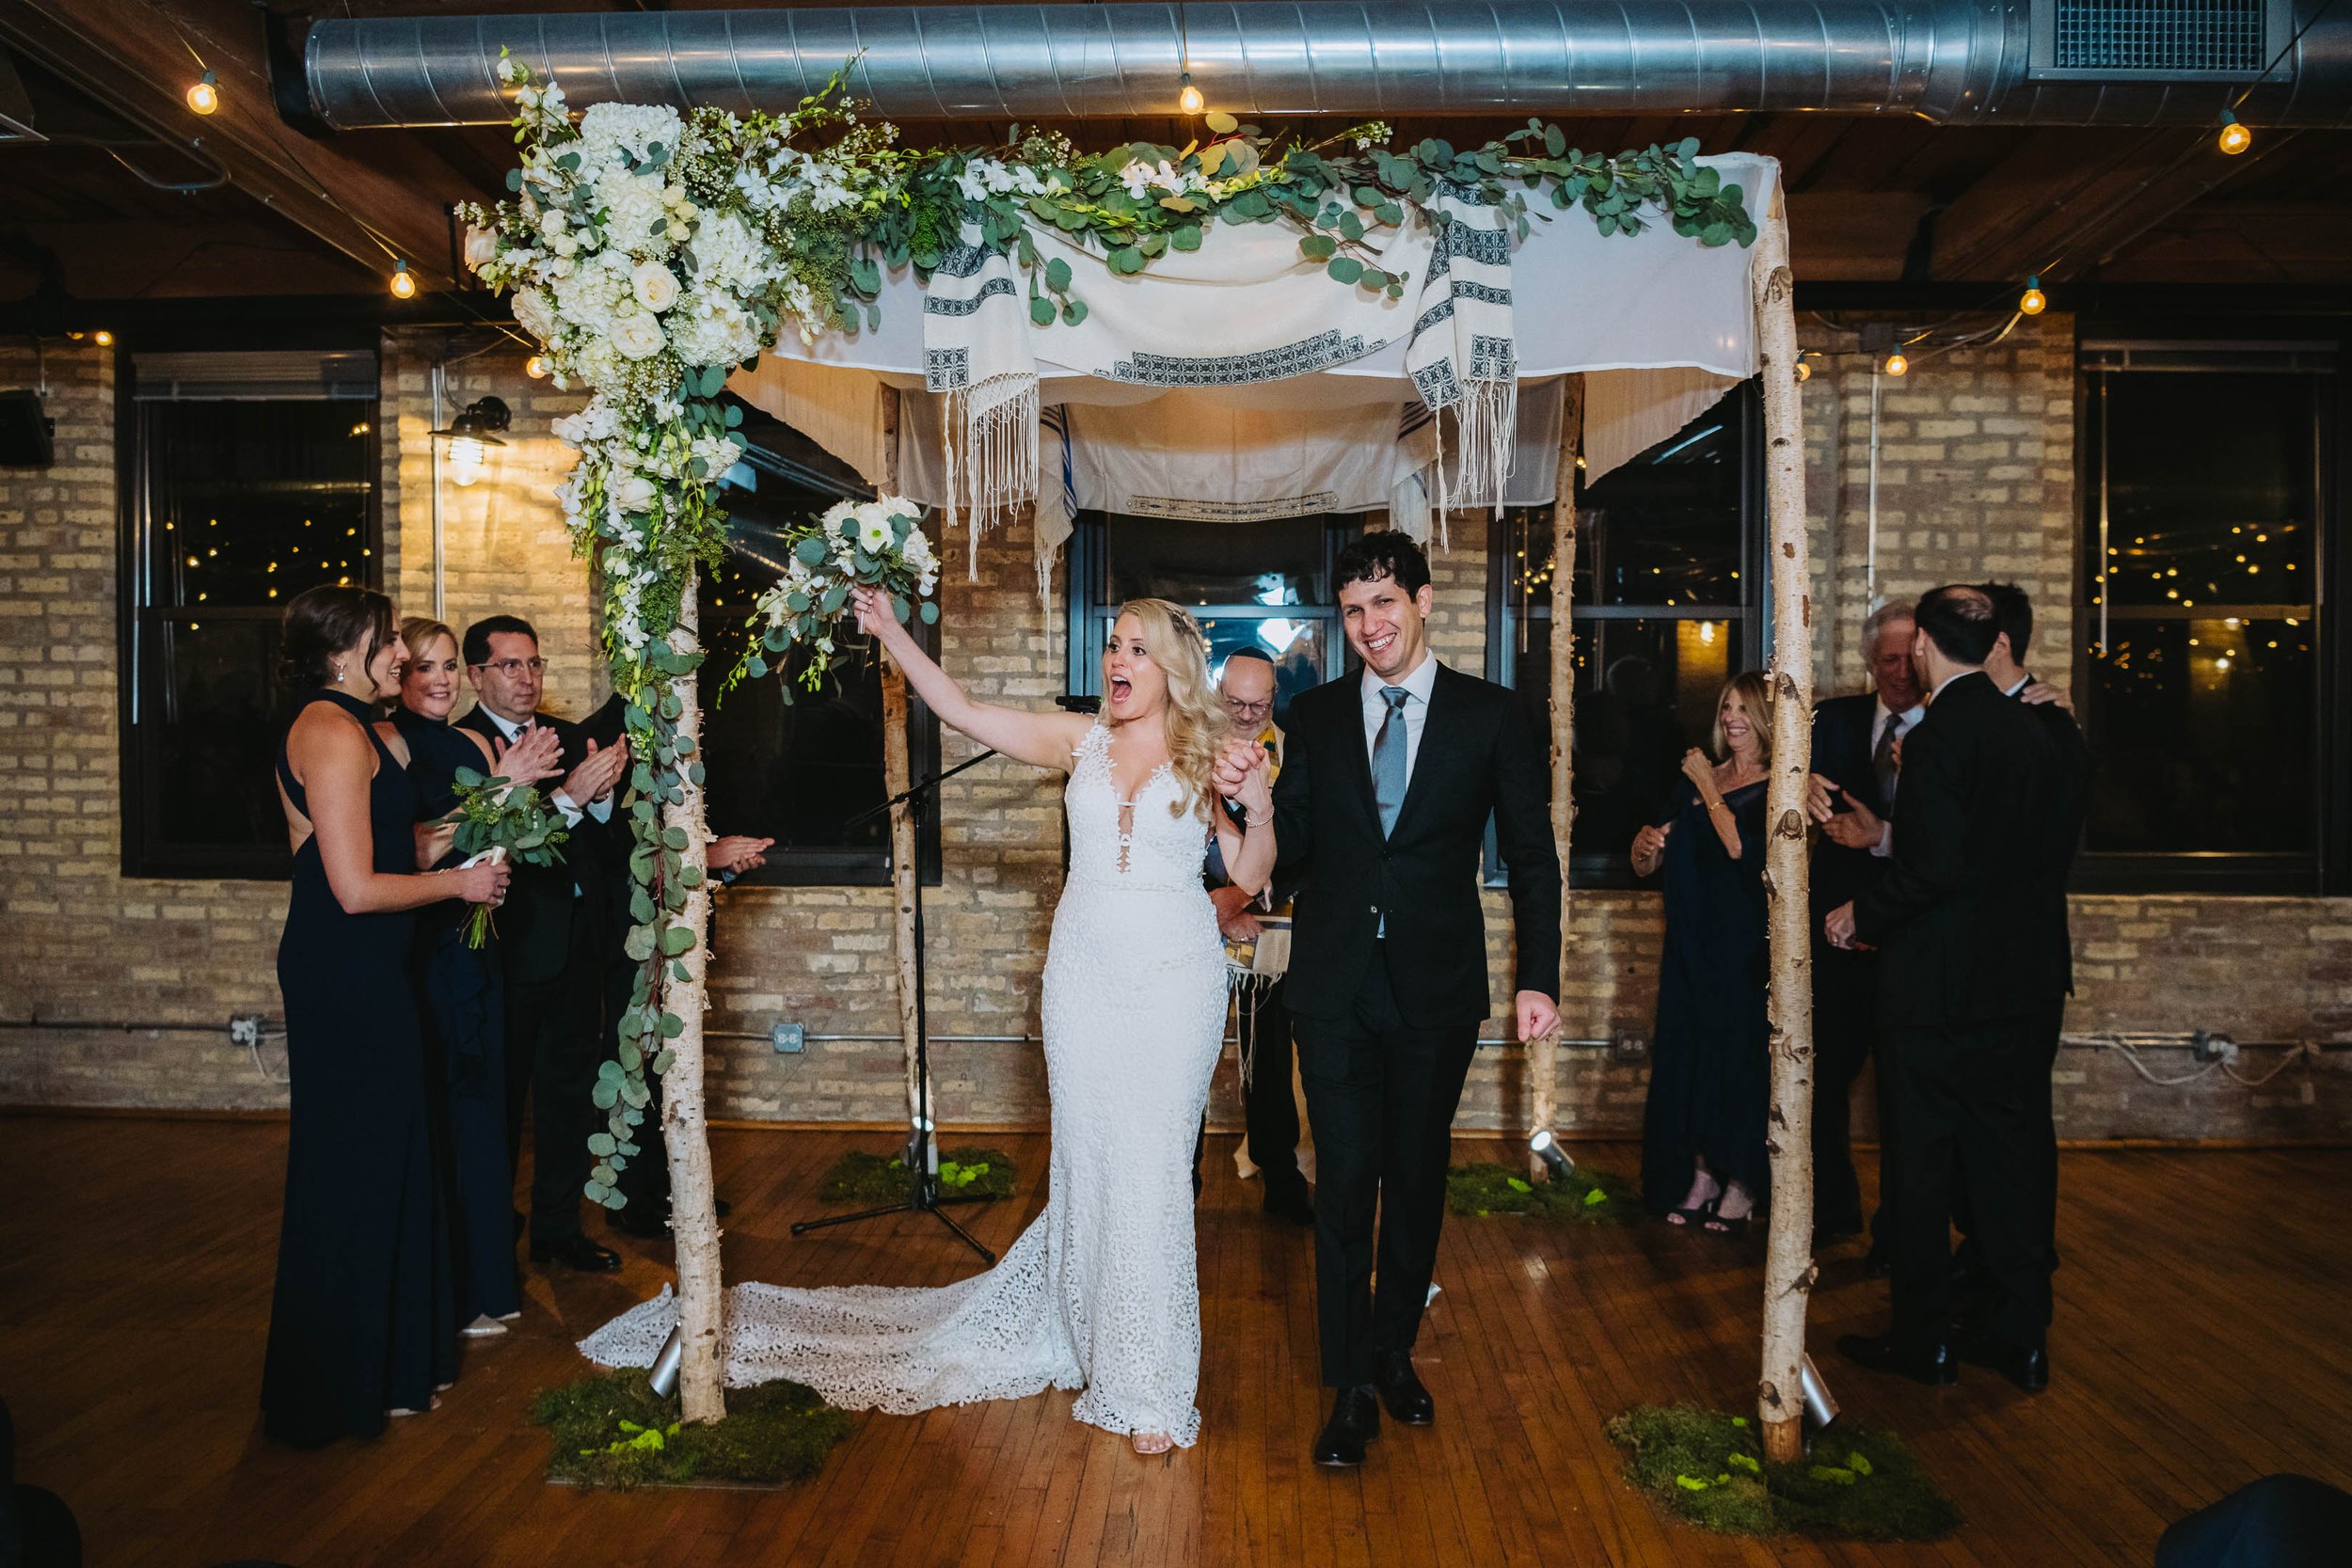 Top Wedding Photographers Near Me | Ravenswood Event Center | J. Brown Photography | bride and groom married under chuppah